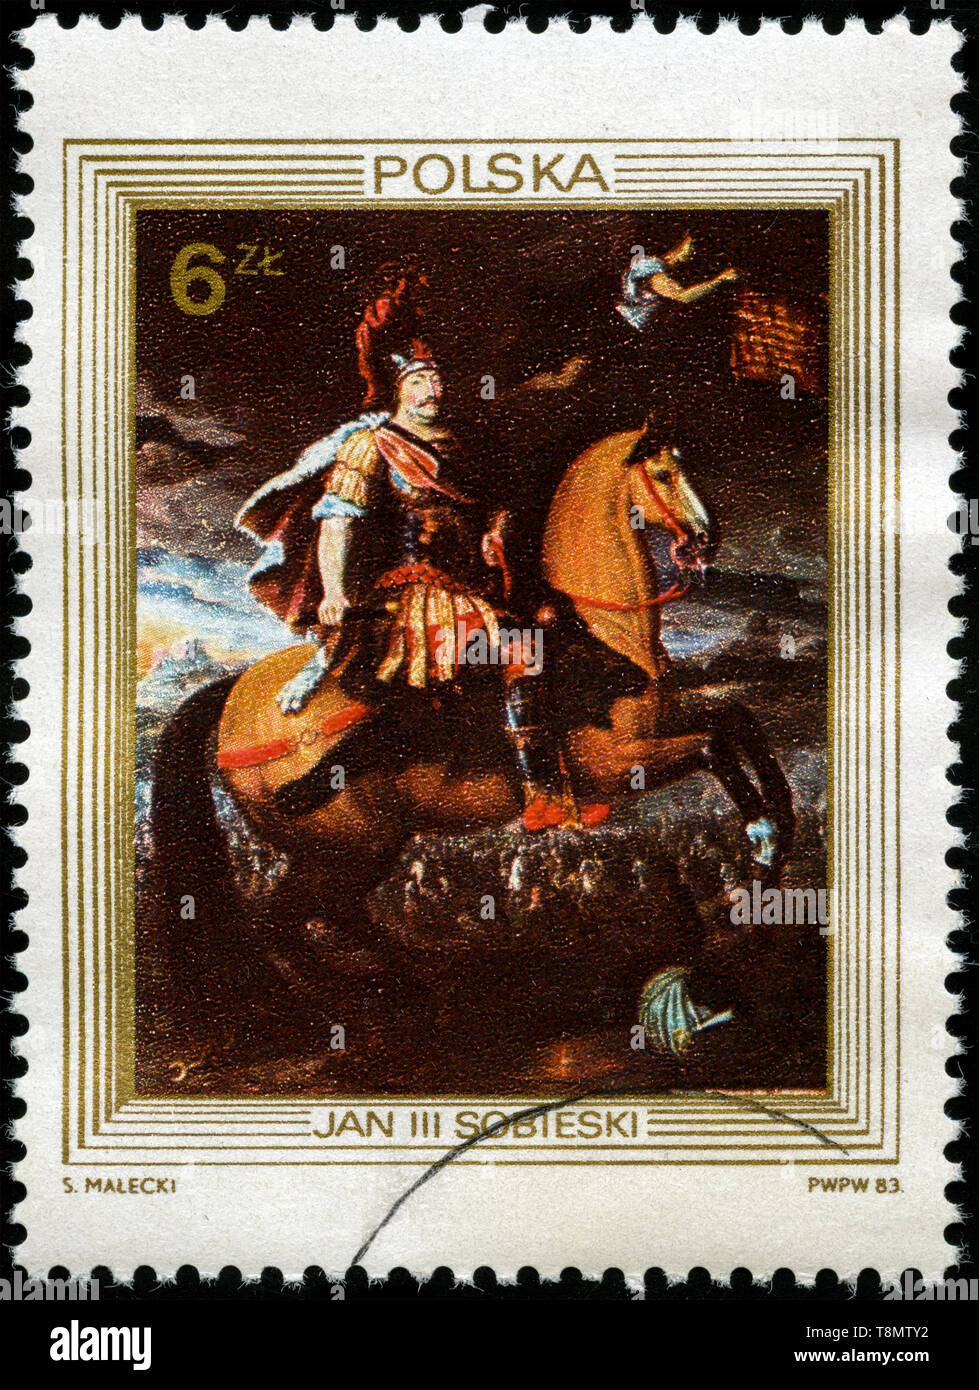 Postage stamp from Poland in the King's Portraits King John III Sobieski series issued in 1983 Stock Photo